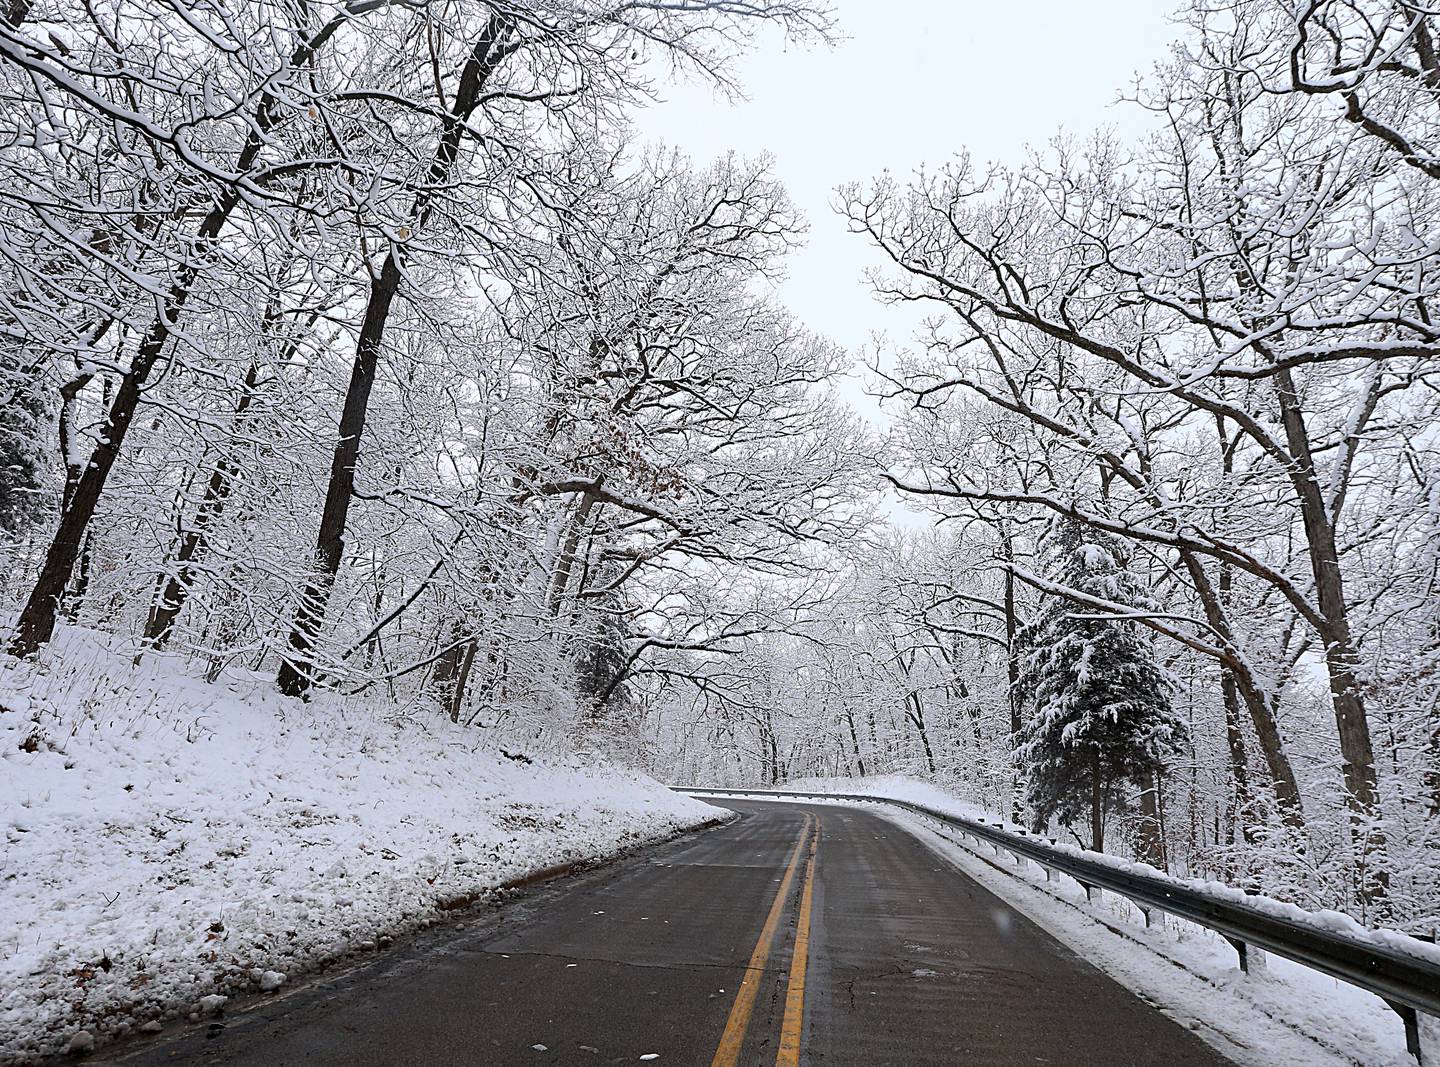 Snow covers trees along Illinois Route 71 on Wednesday, Jan. 25, 2023 in Starved Rock State Park.